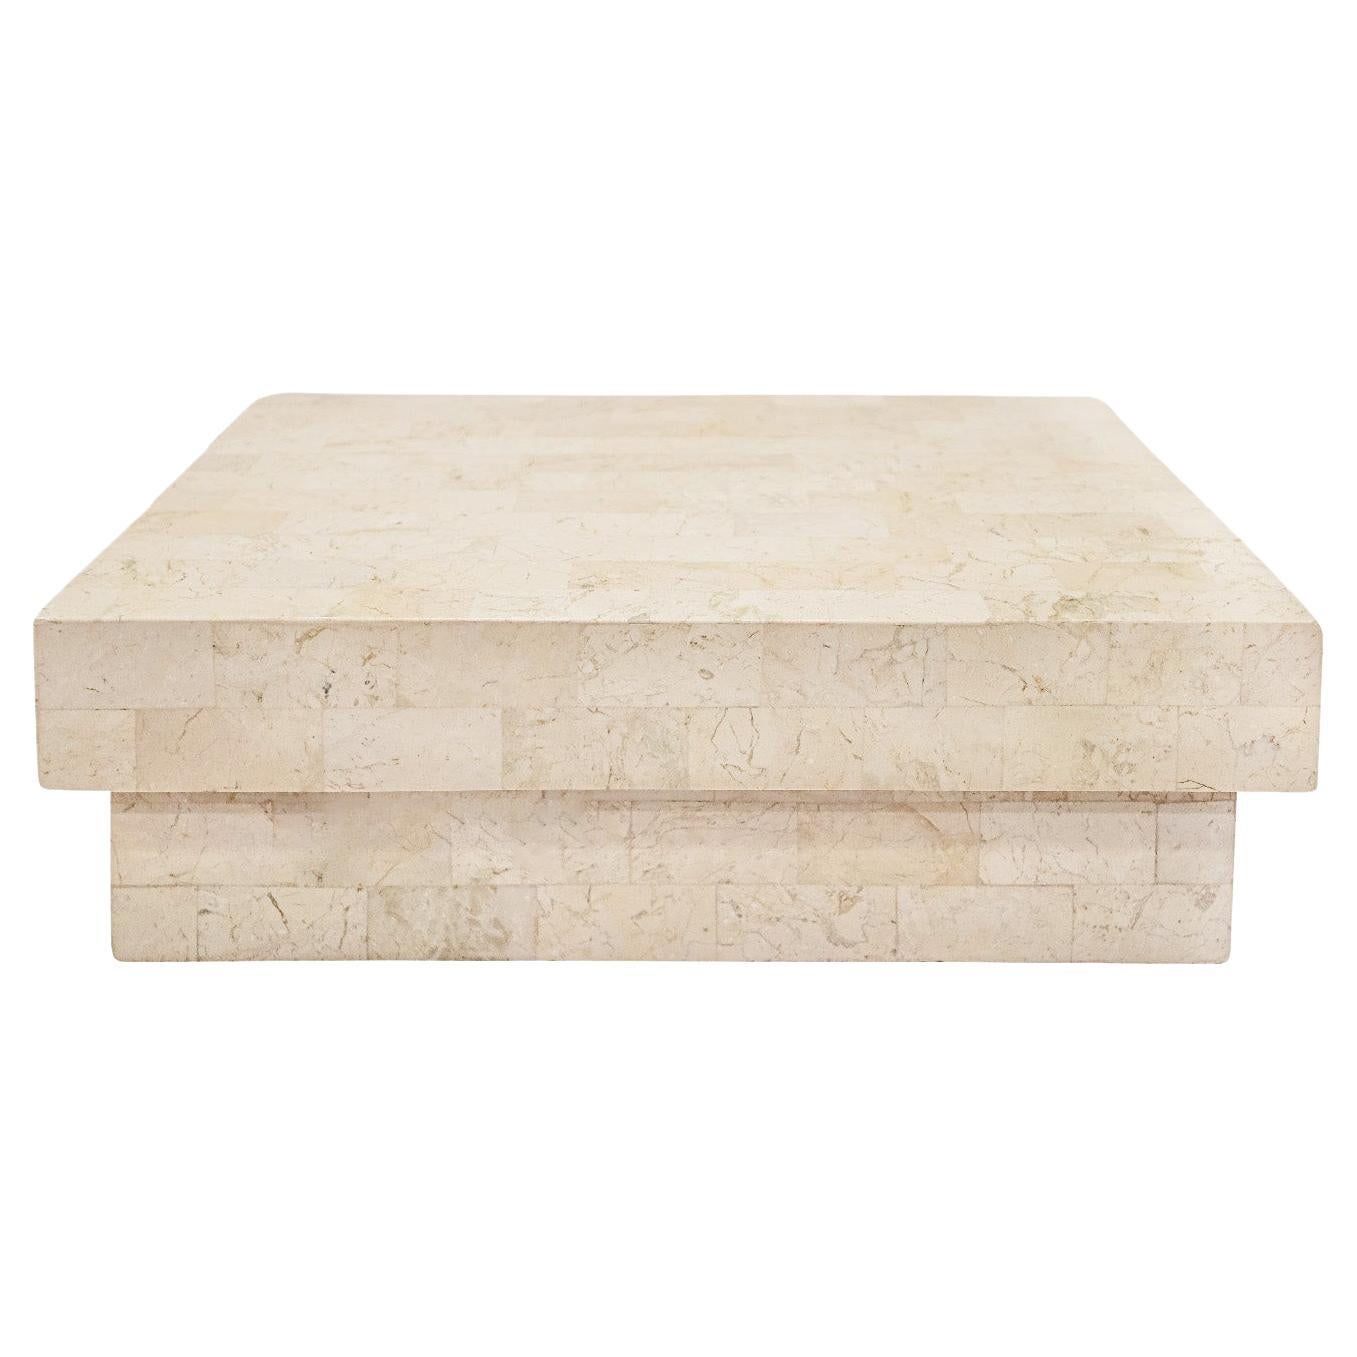 Karl Springer Exceptional Lidded Box in Tessellated Travertine 1980s 'Signed' For Sale